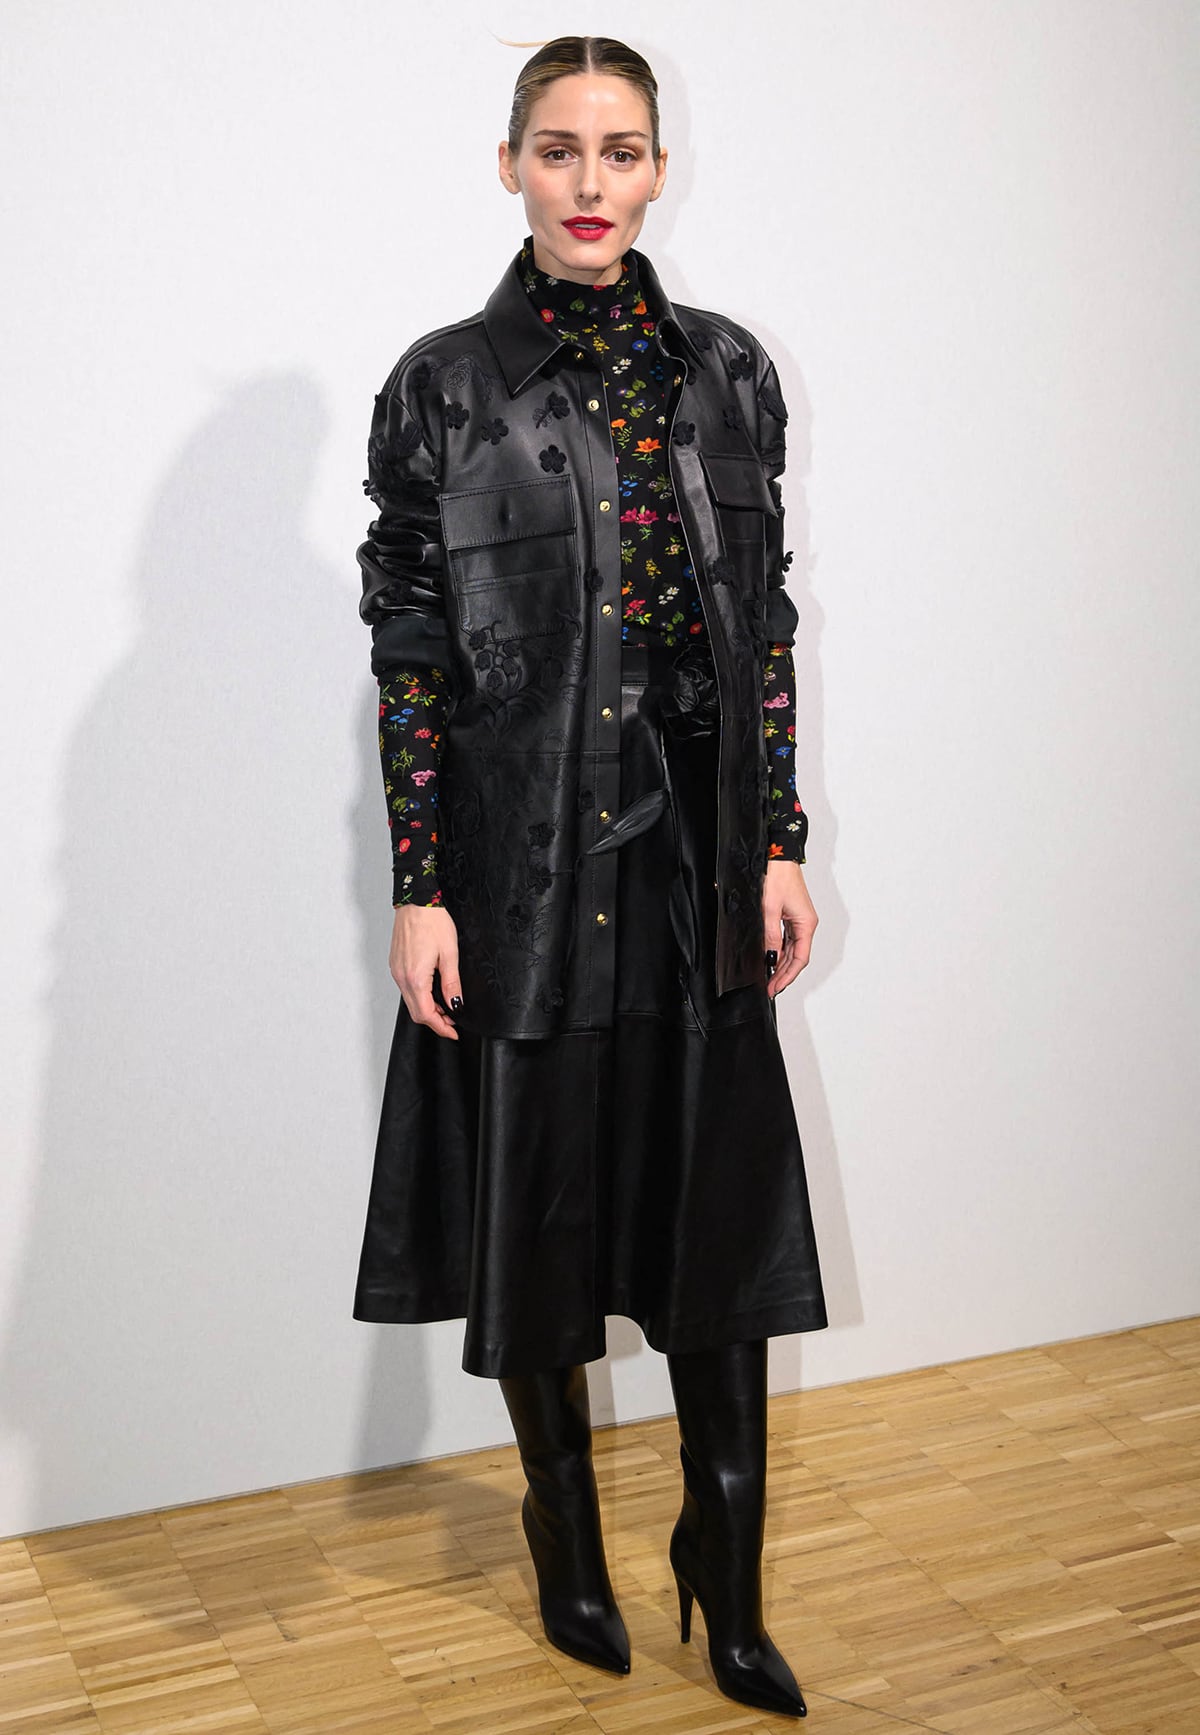 Olivia Palermo looks luxurious in an Elie Saab leather embroidered jacket and a leather midi skirt at the Lebanese fashion designer's runway presentation during Paris Fashion Week on January 25, 2023